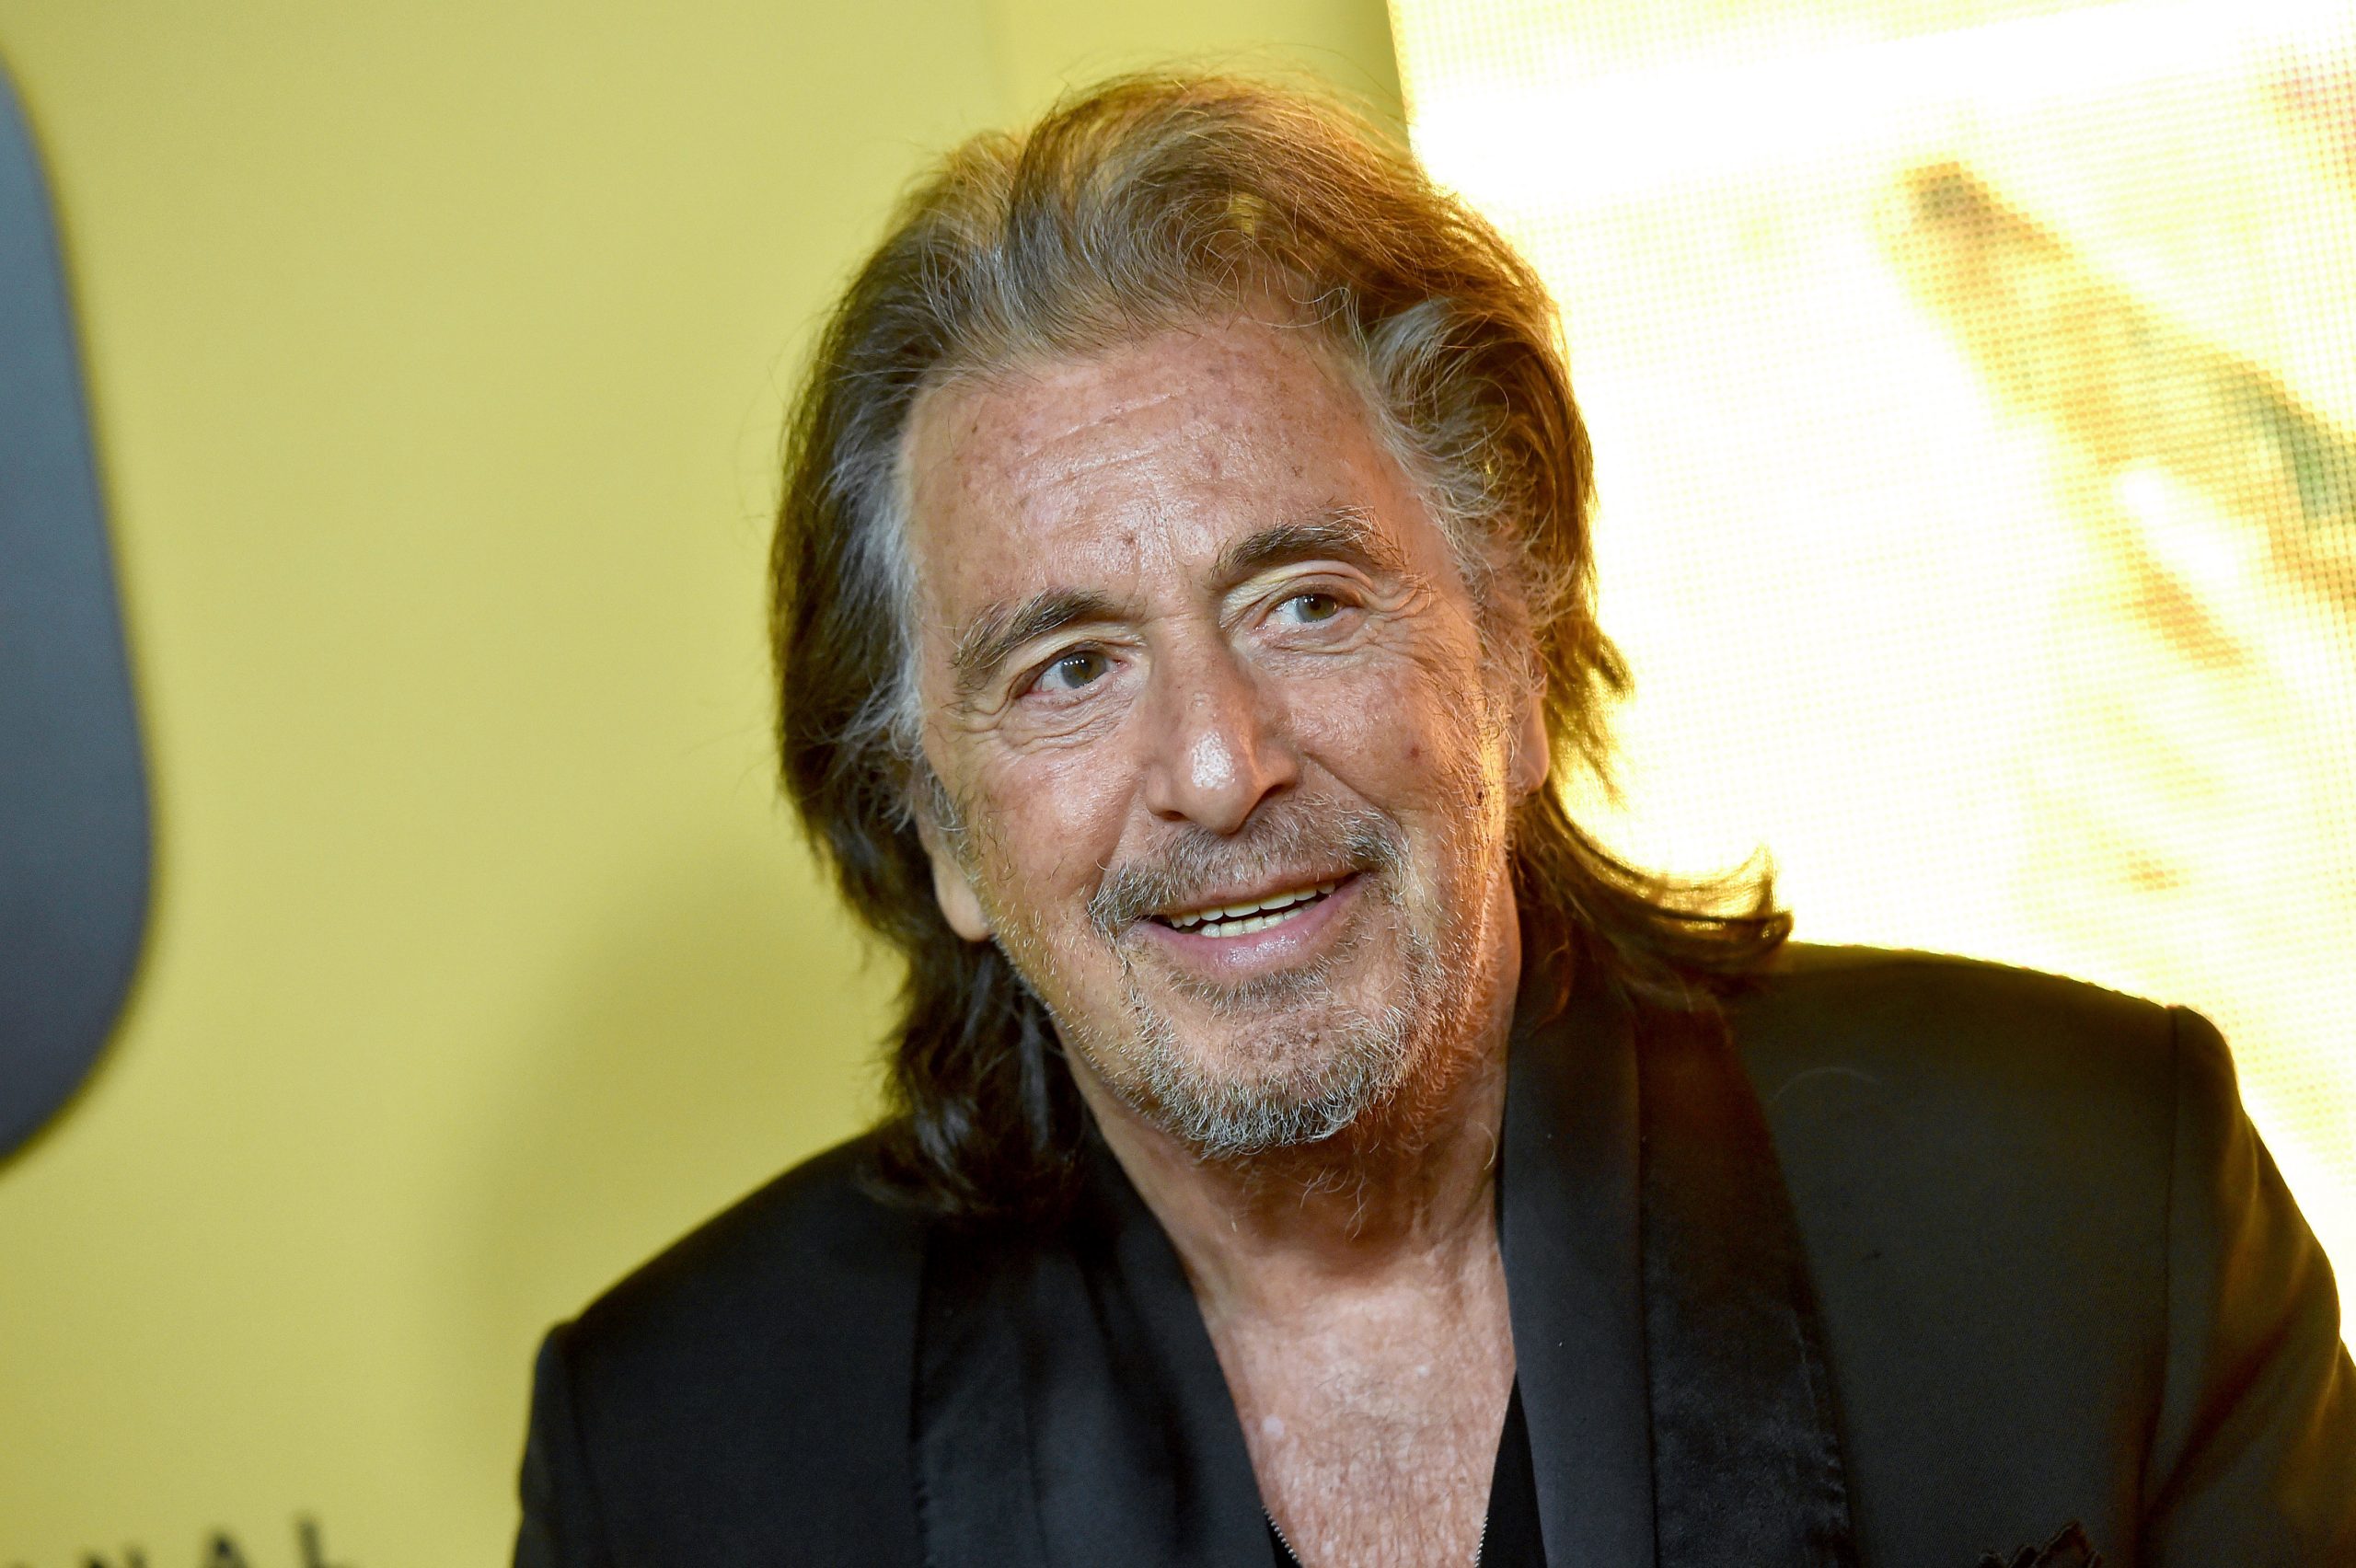 Al Pacino Wiki, Bio, Age, Net Worth, and Other Facts